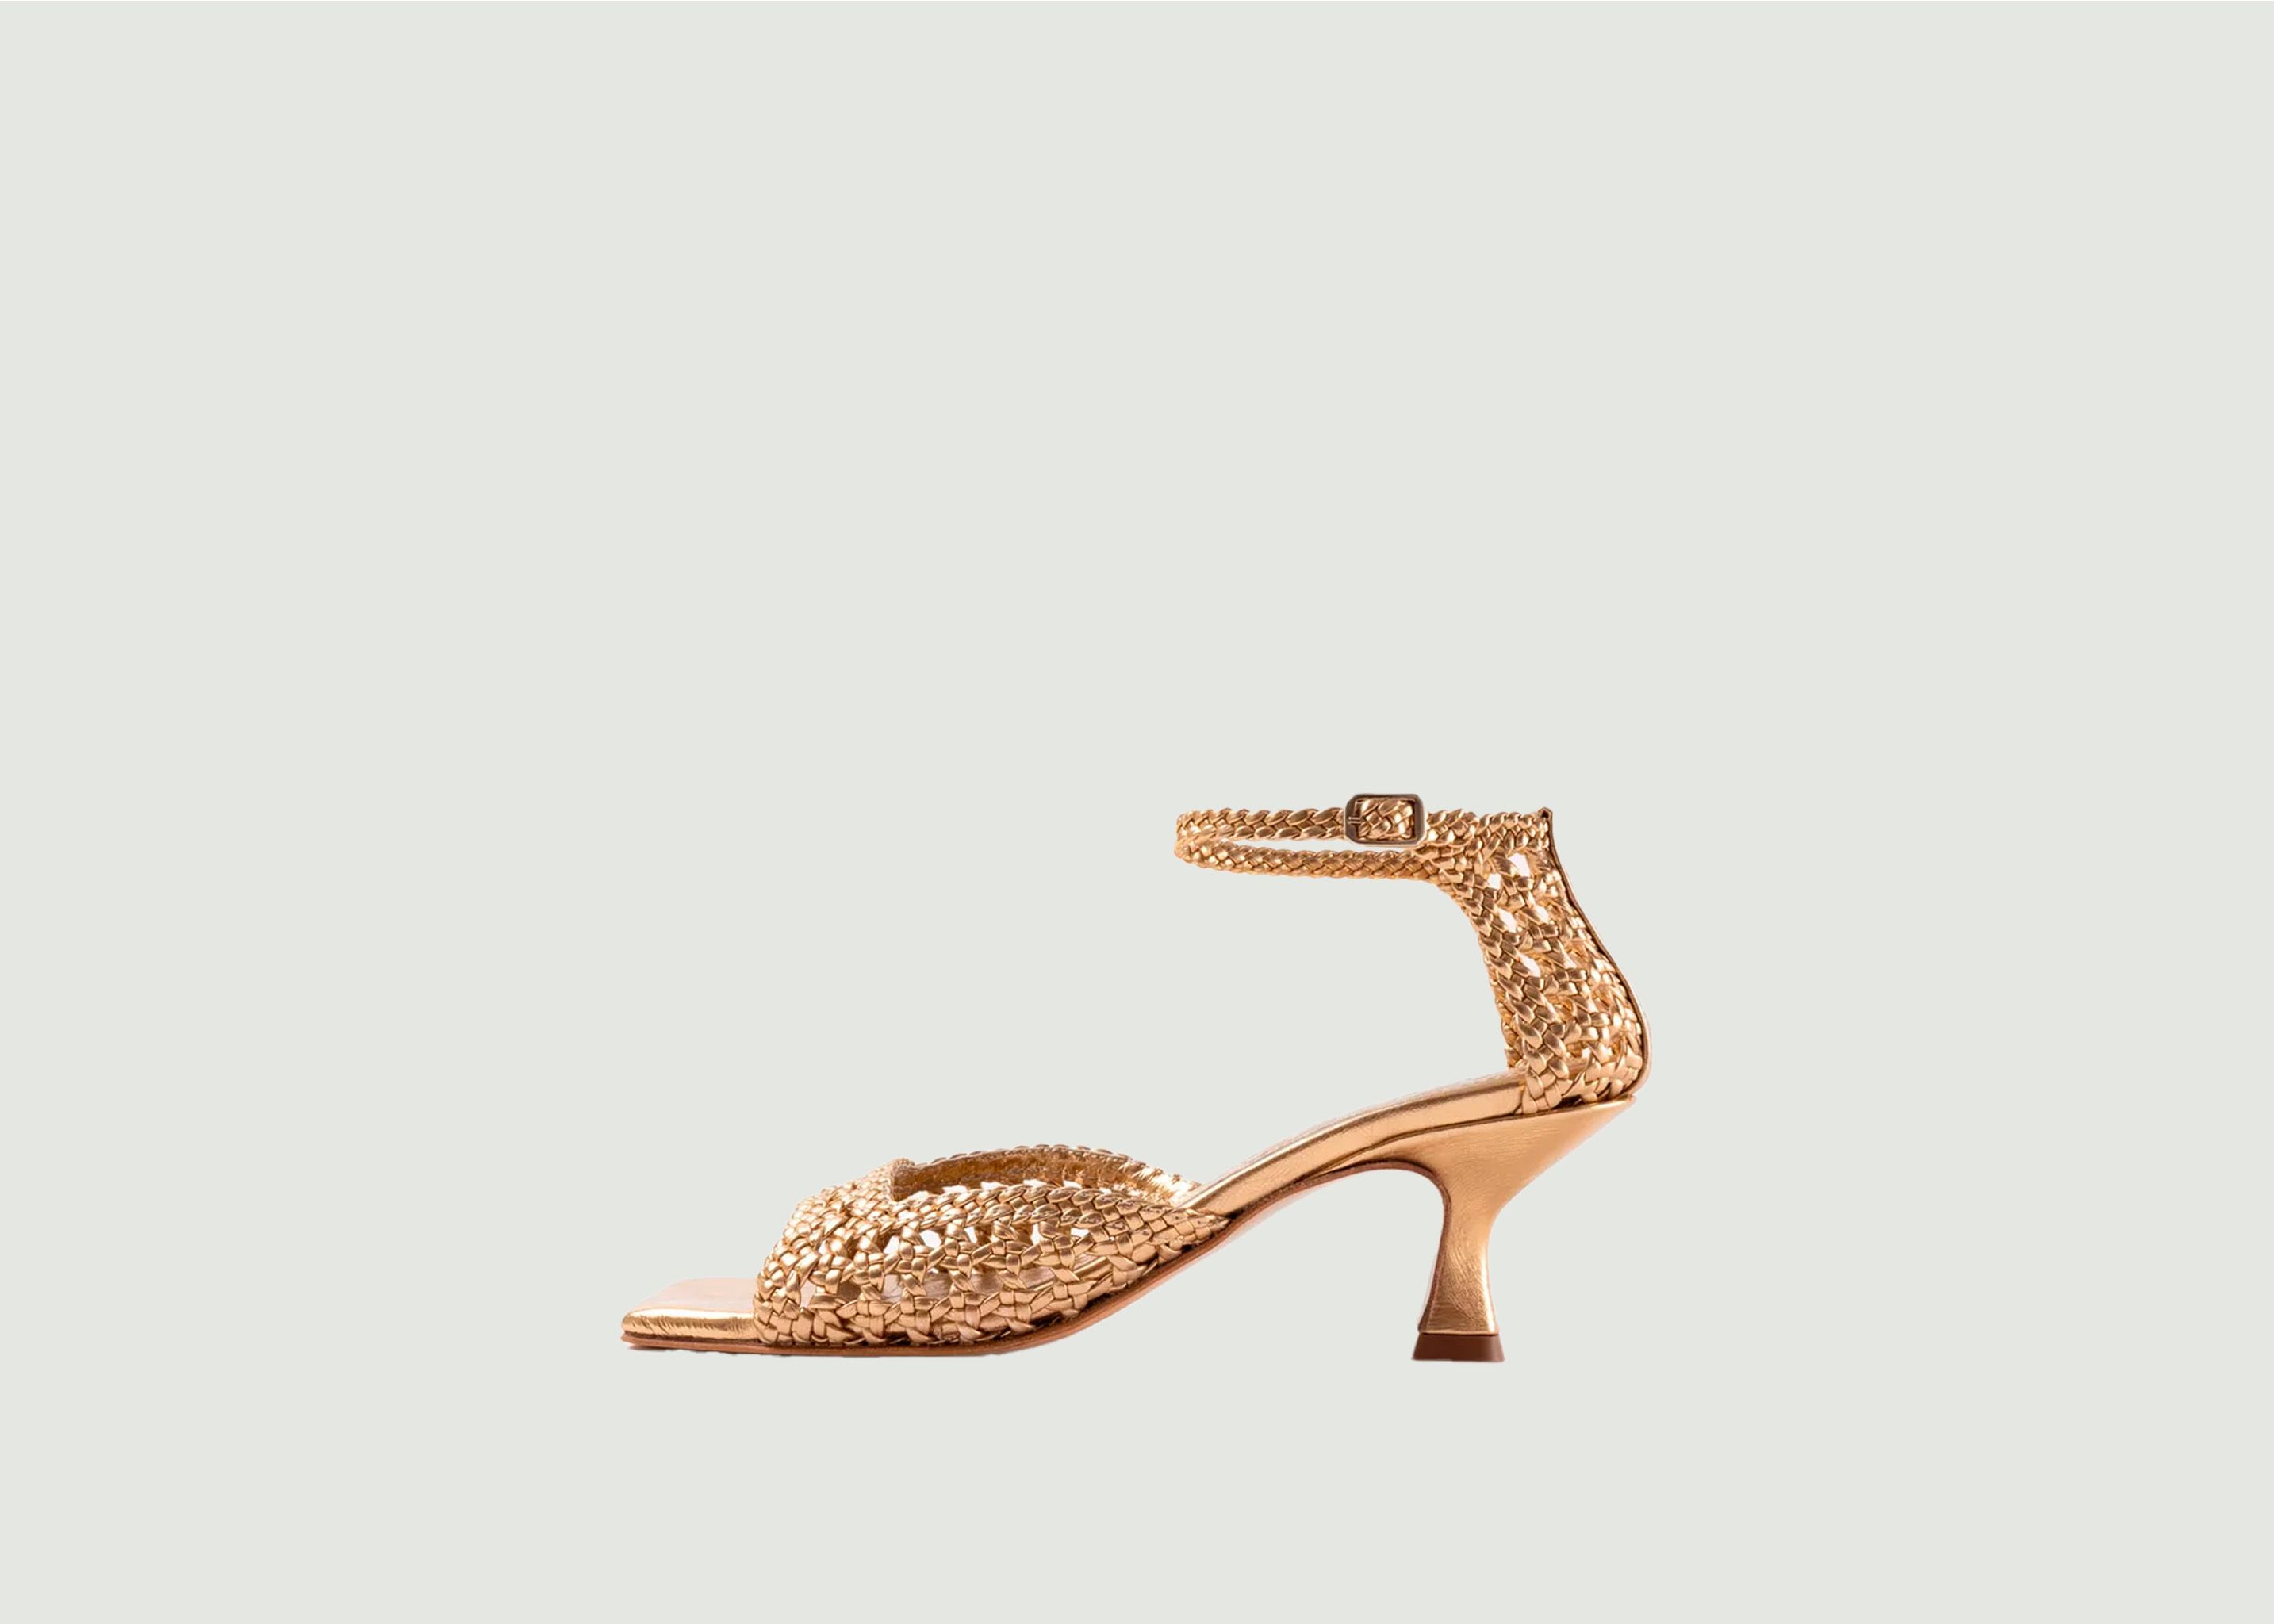 Veronica woven leather heeled sandals - Souliers Martinez